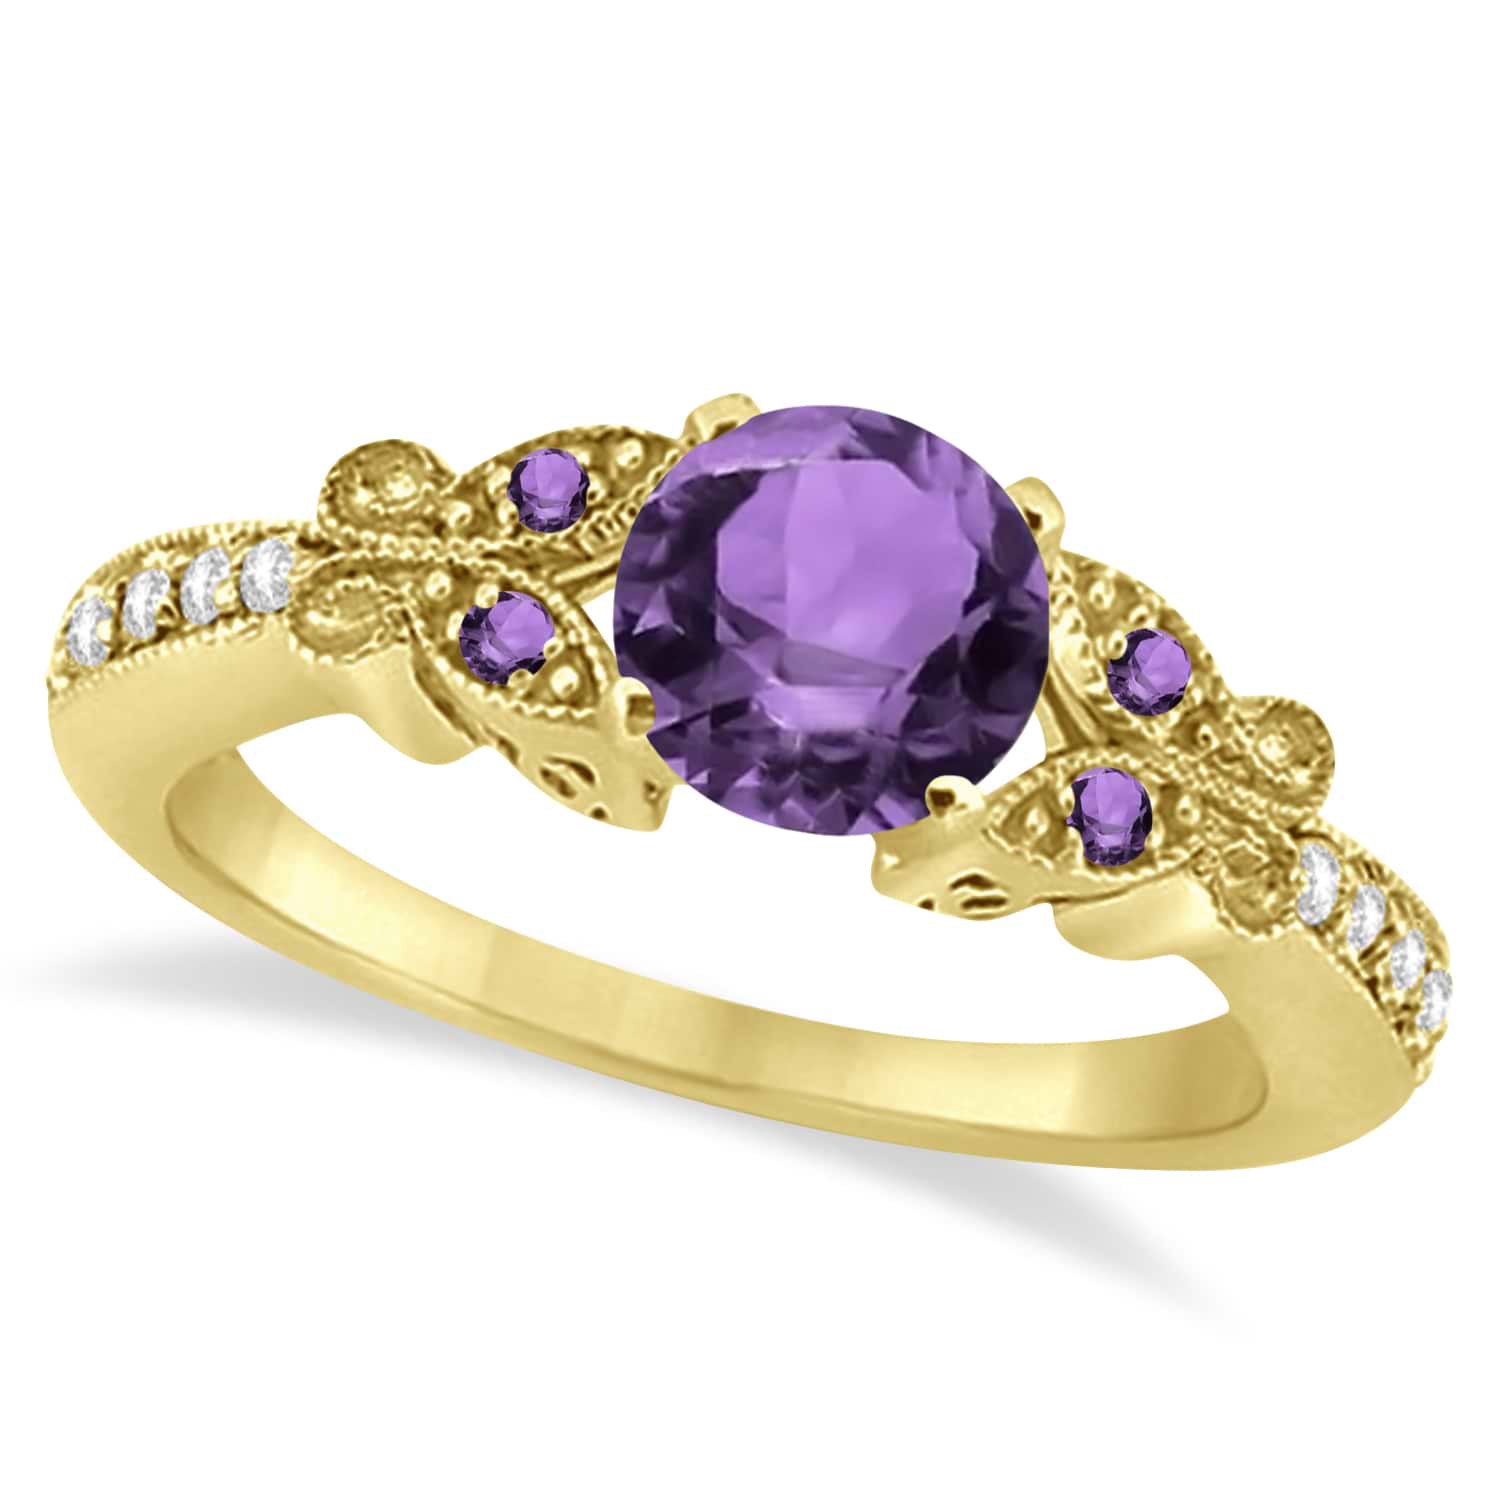 Butterfly Amethyst & Diamond Engagement Ring 18K Yellow Gold 0.88ctw